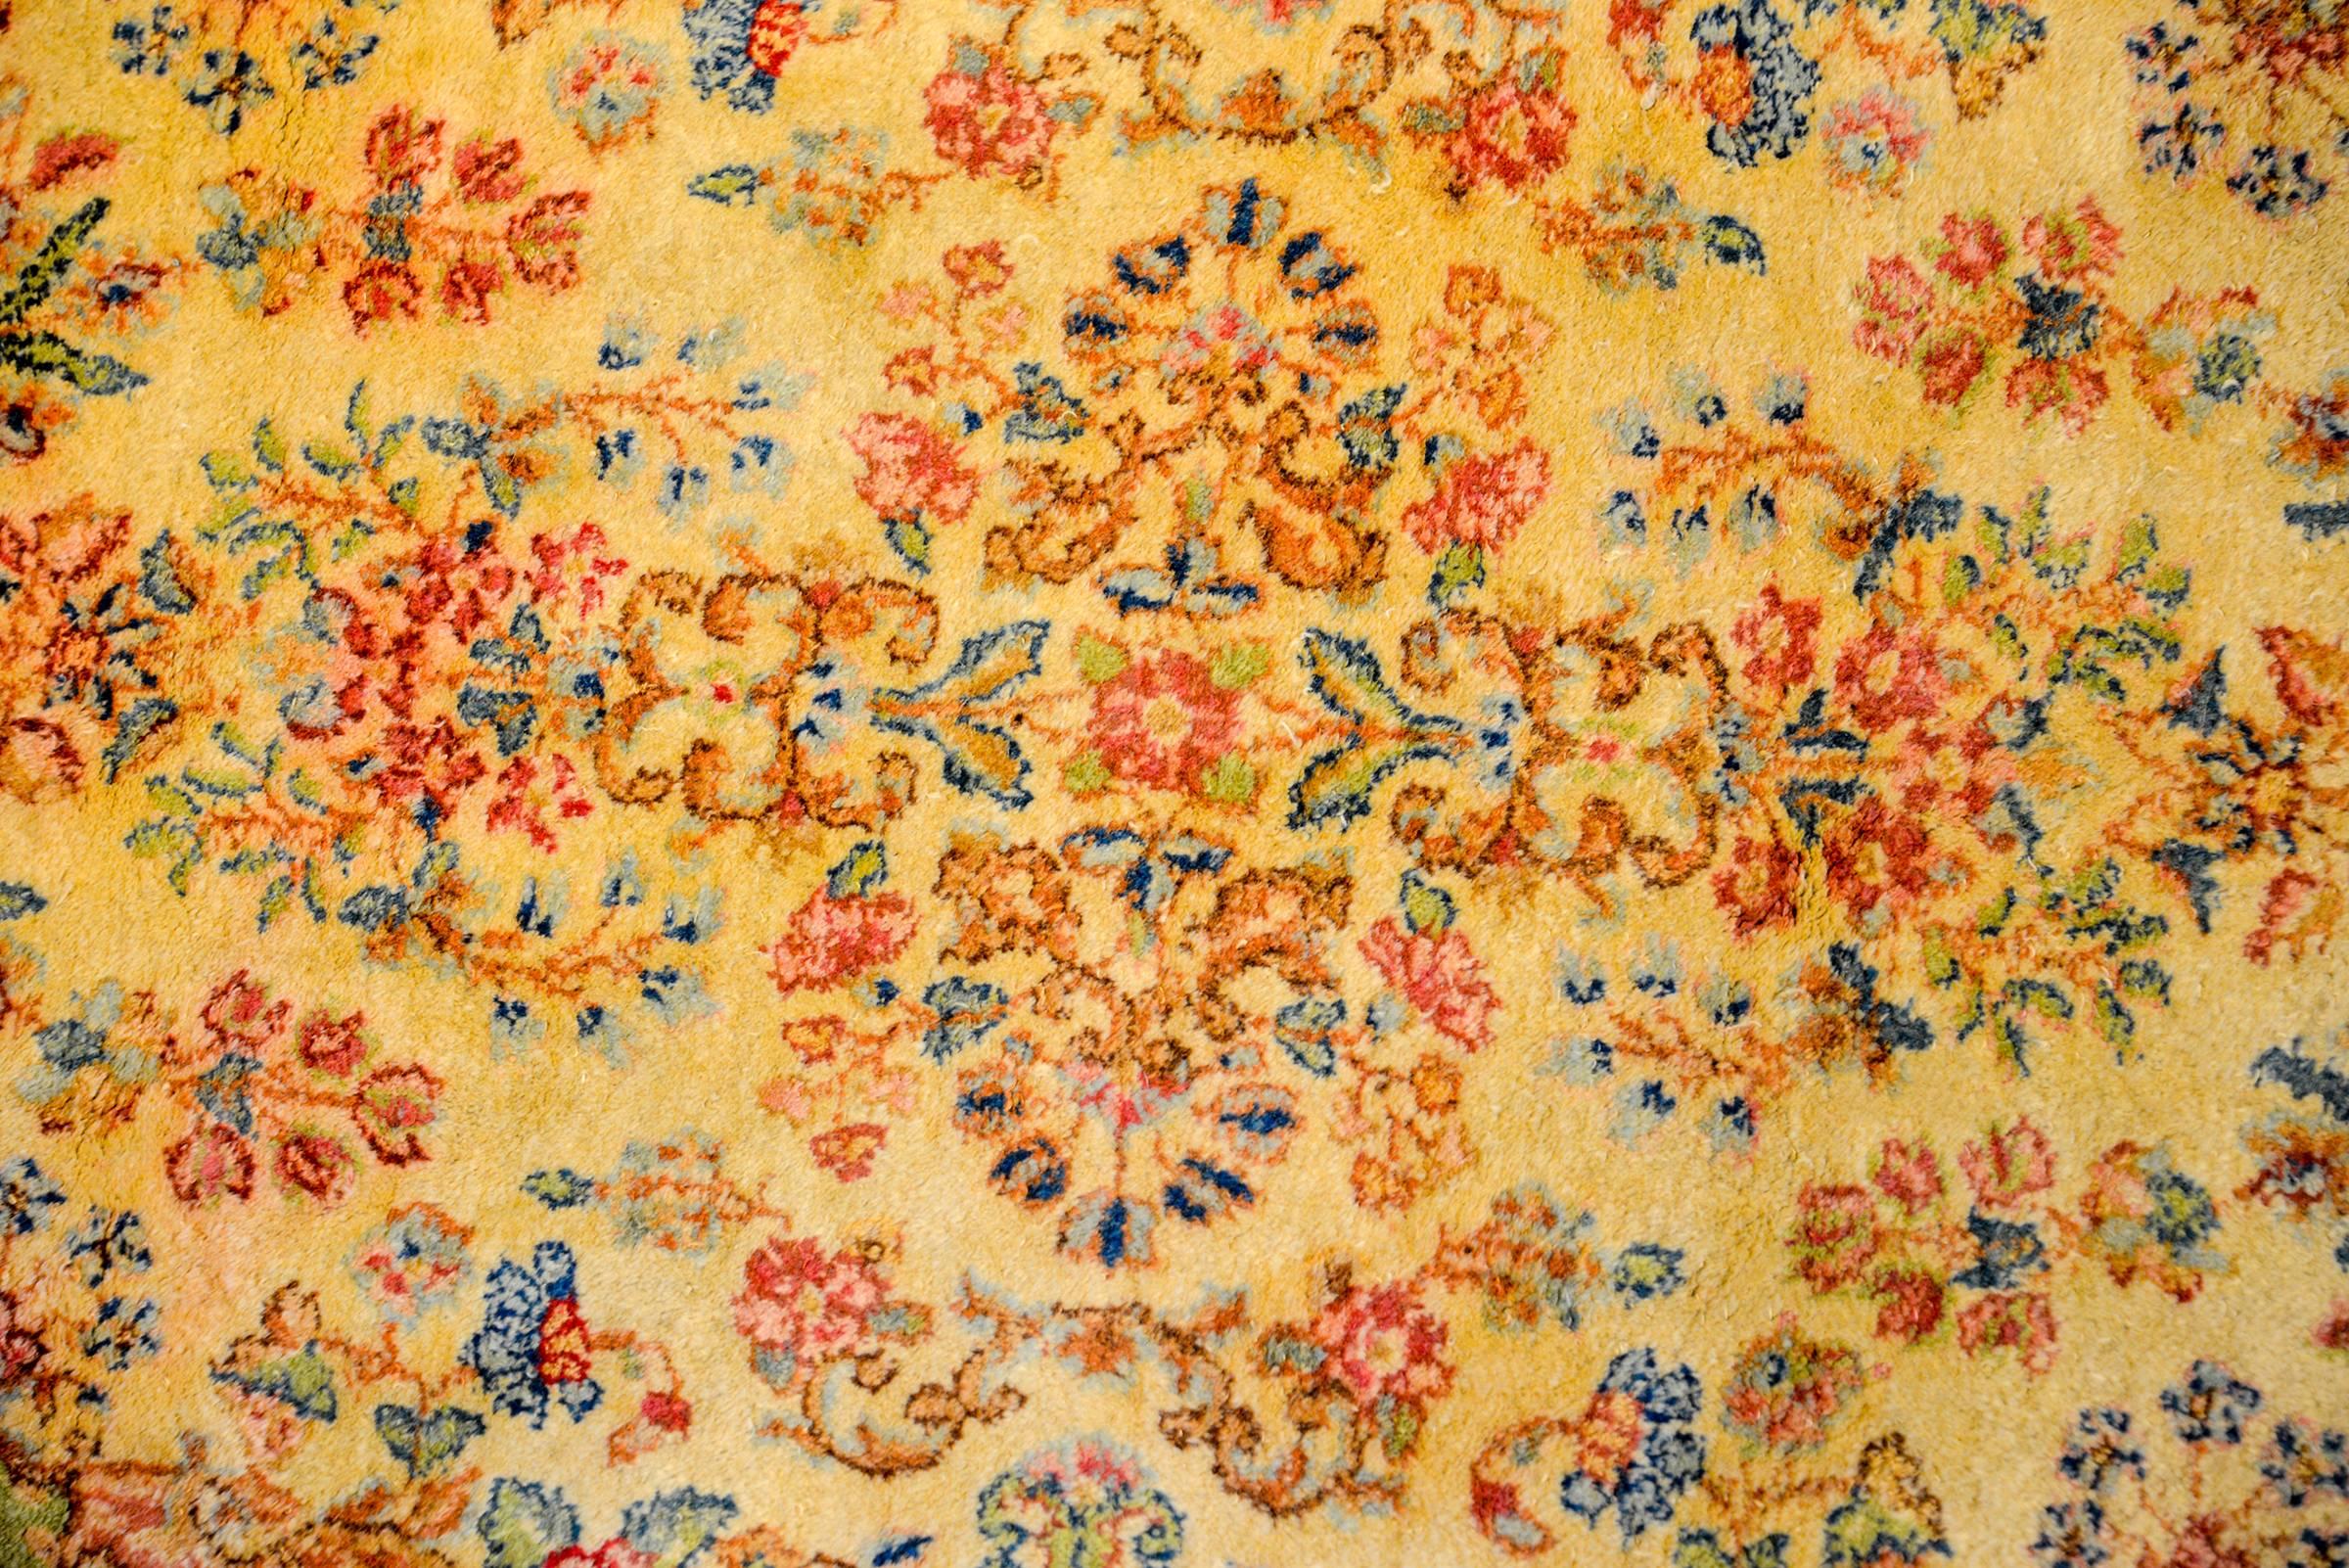 A sweet early 20th century Persian Kirman rug with a wonderful gold background with a multicolored floral and vine overplayed pattern woven in natural vegetable dyed wool. The border is unique with myriad scrolls and curved shapes woven in